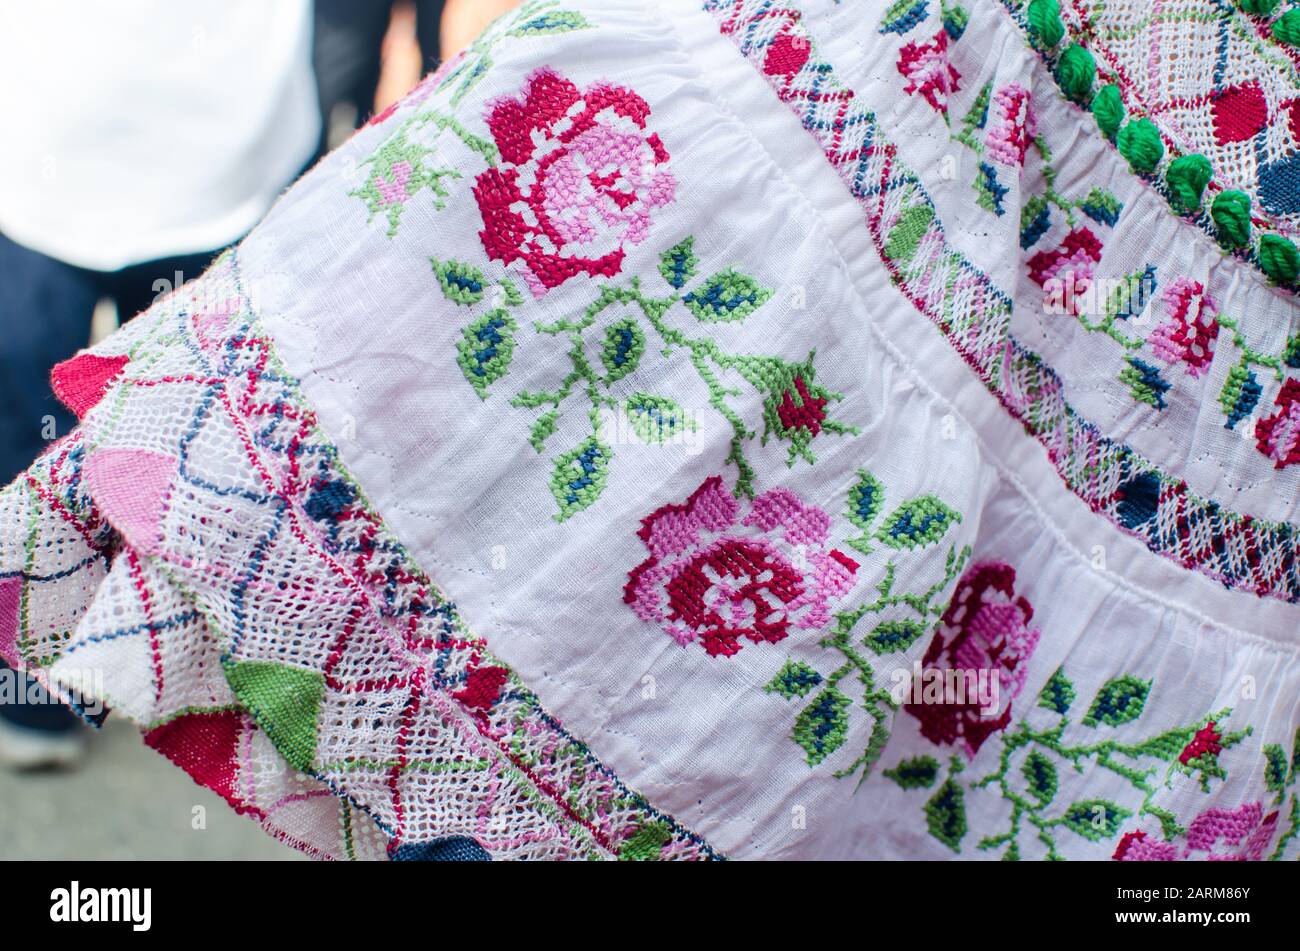 Details of the typical Panamanian dress known as pollera. The pattern is all handmade using different embroidery techniques Stock Photo